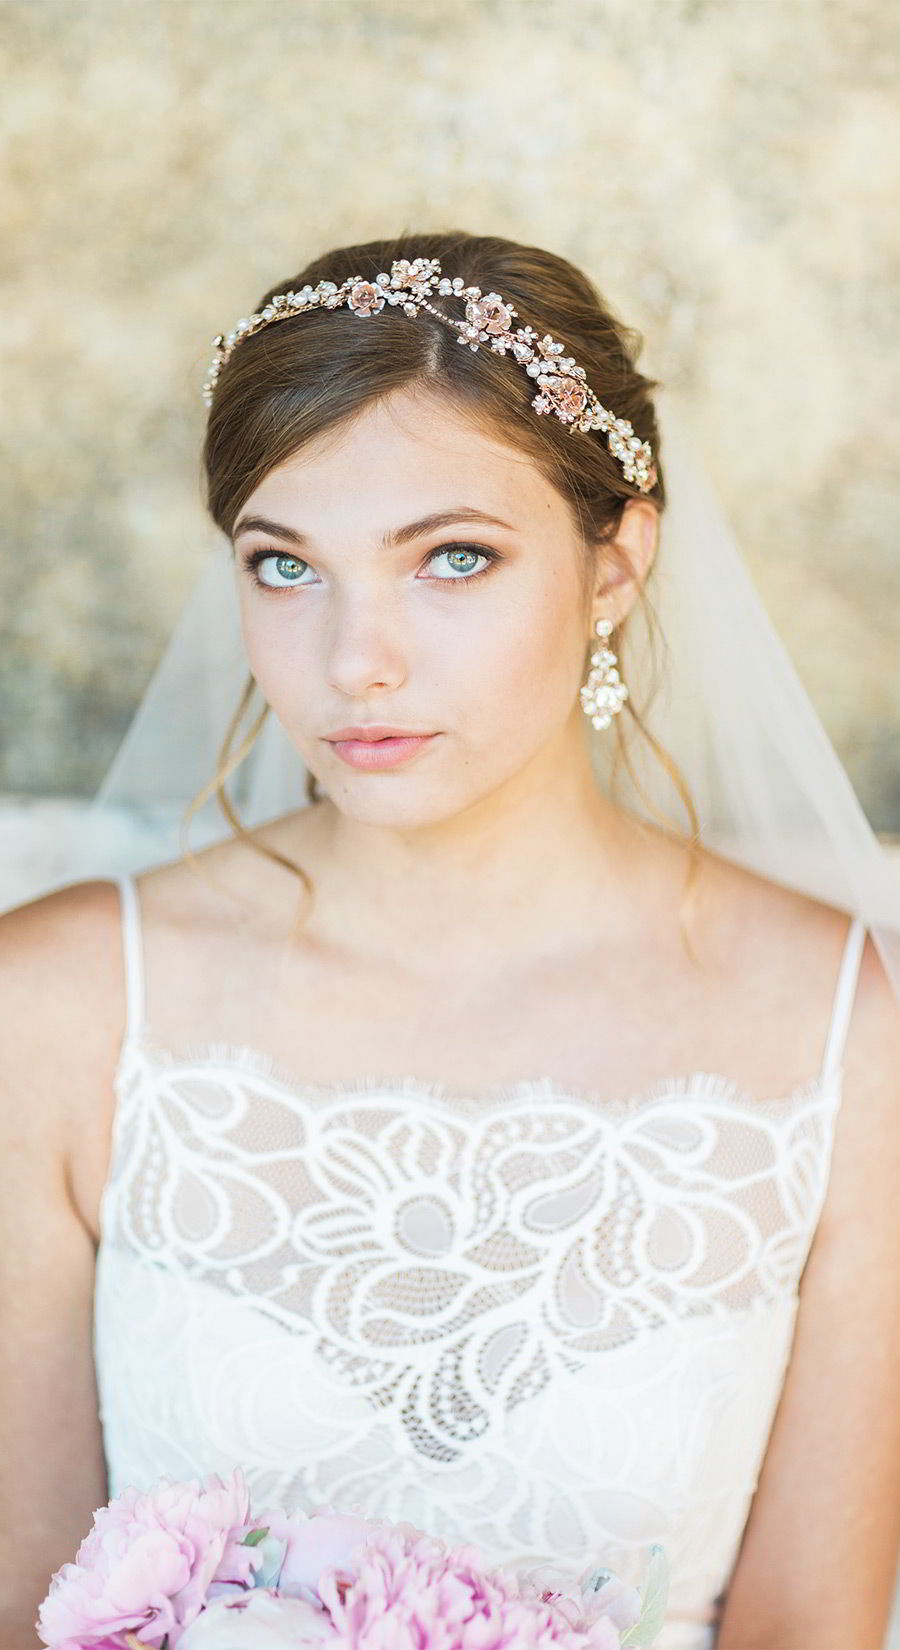 Bridal Headpieces and Veils - Wedding Accessories